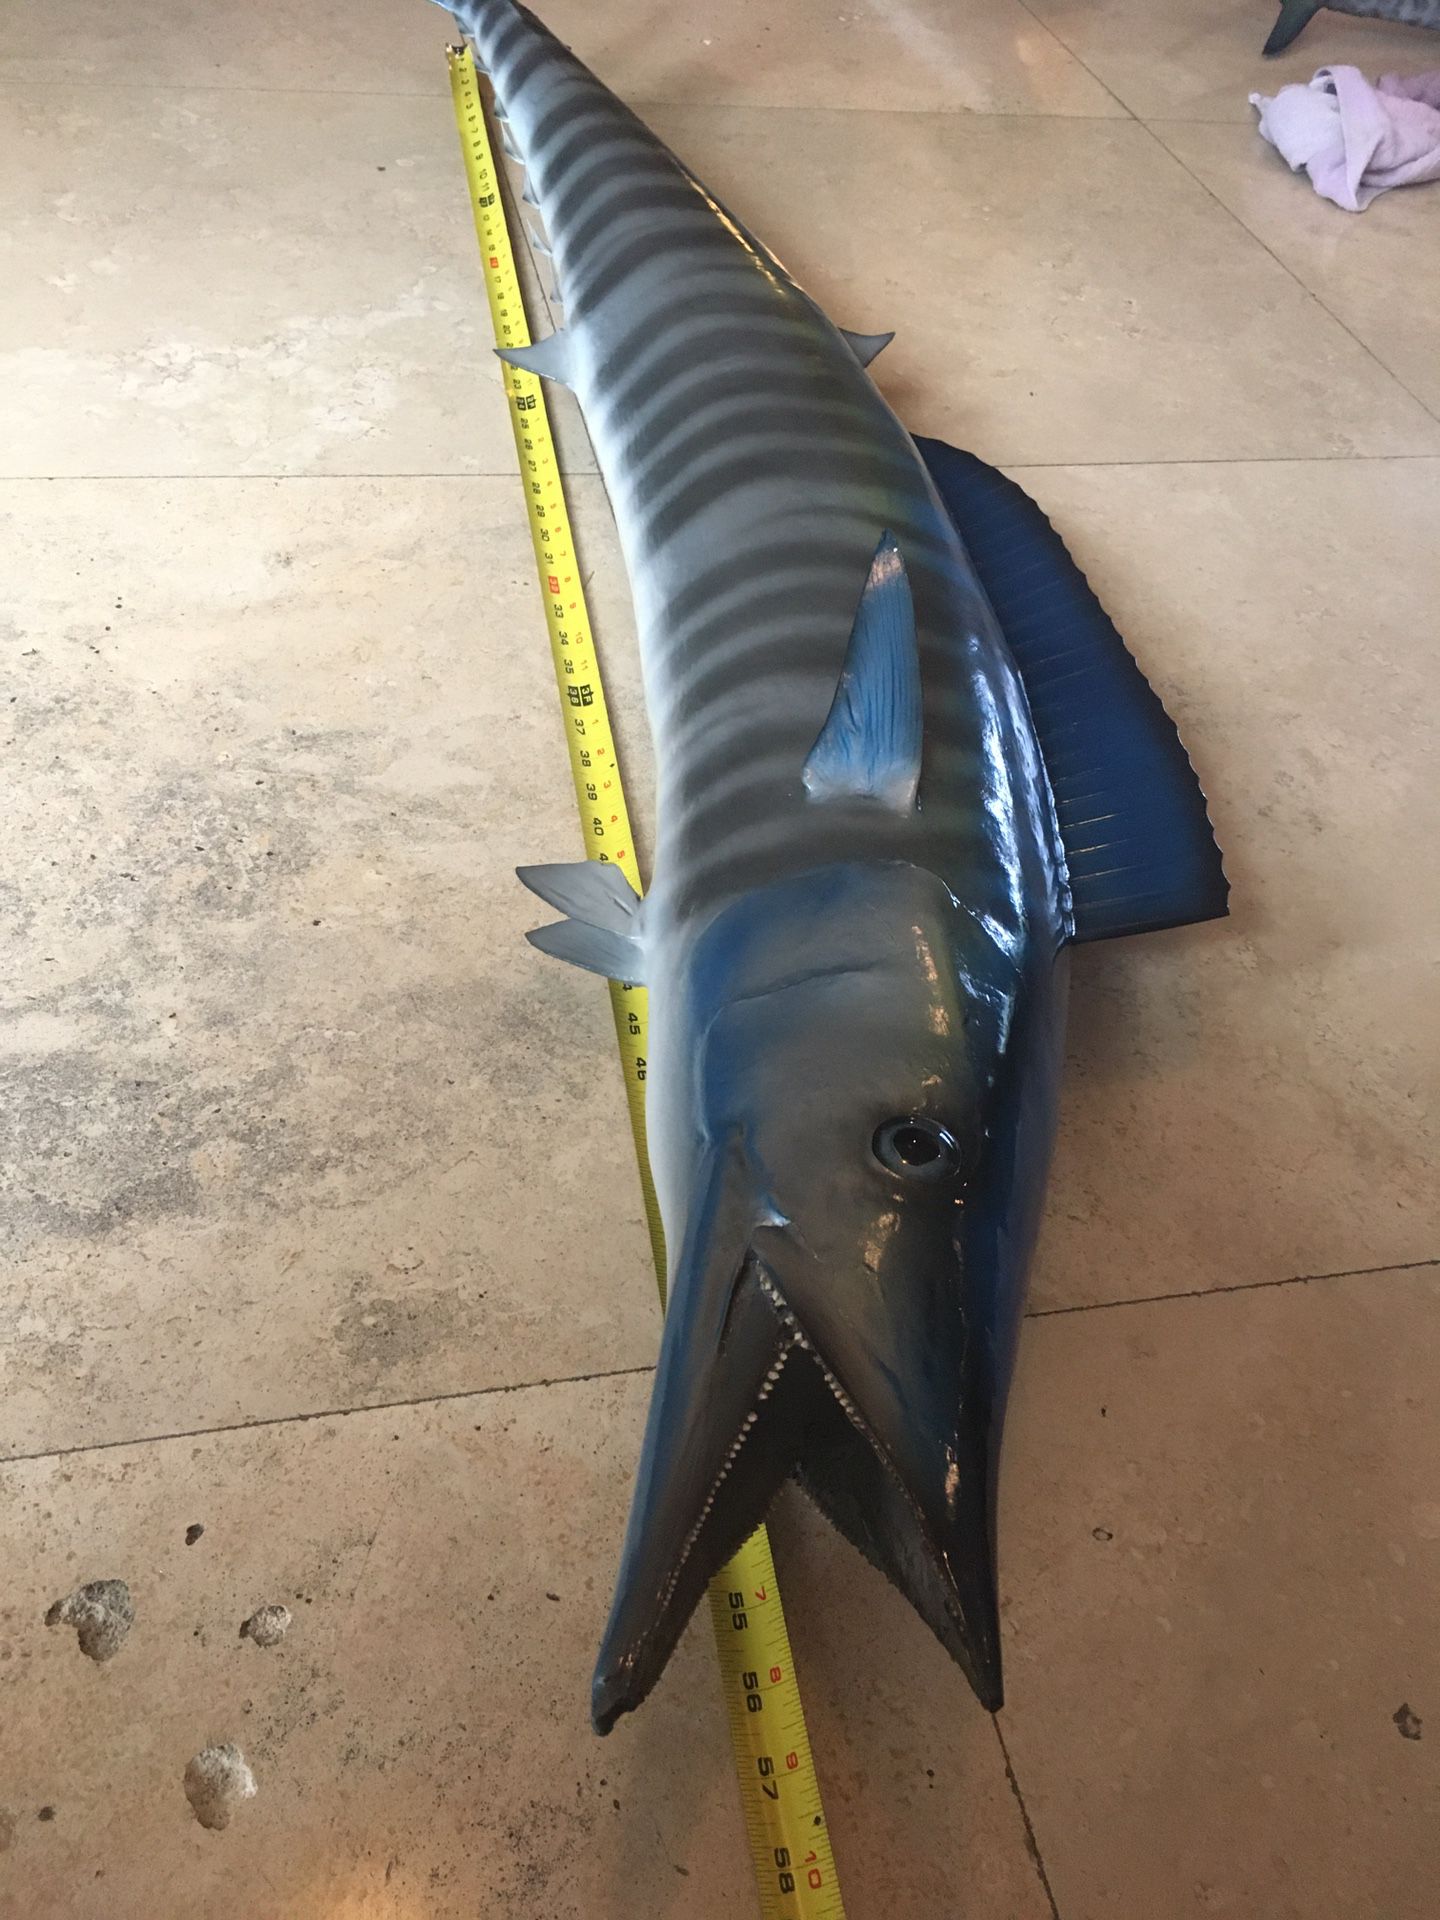 Mint Condition Big 5ft Wahoo Fish Mount For Sale Taxidermy